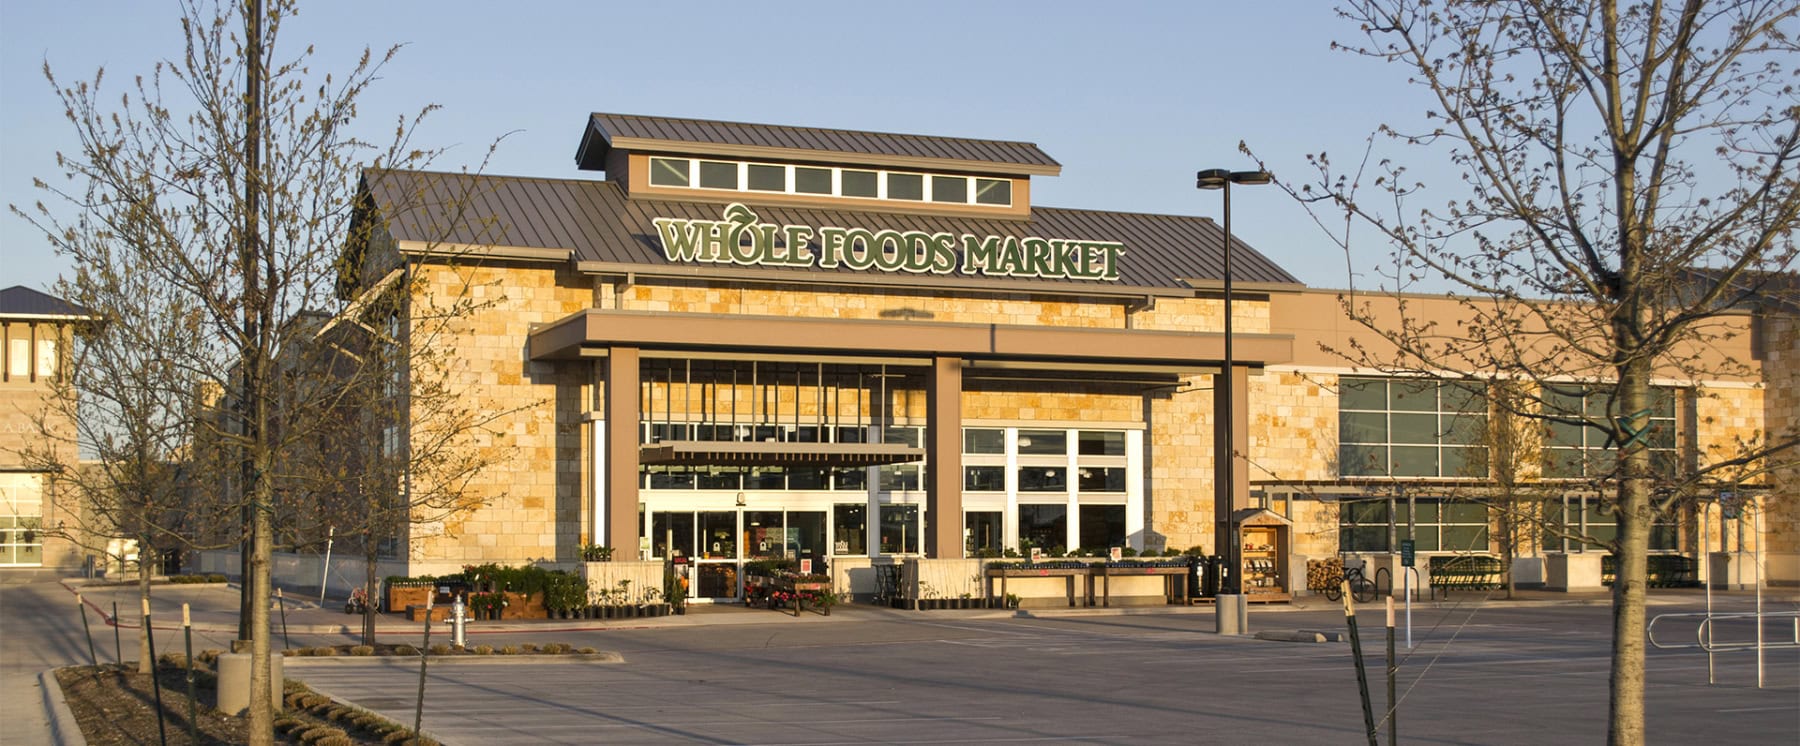 Whole Foods Market at Highland Village featured image